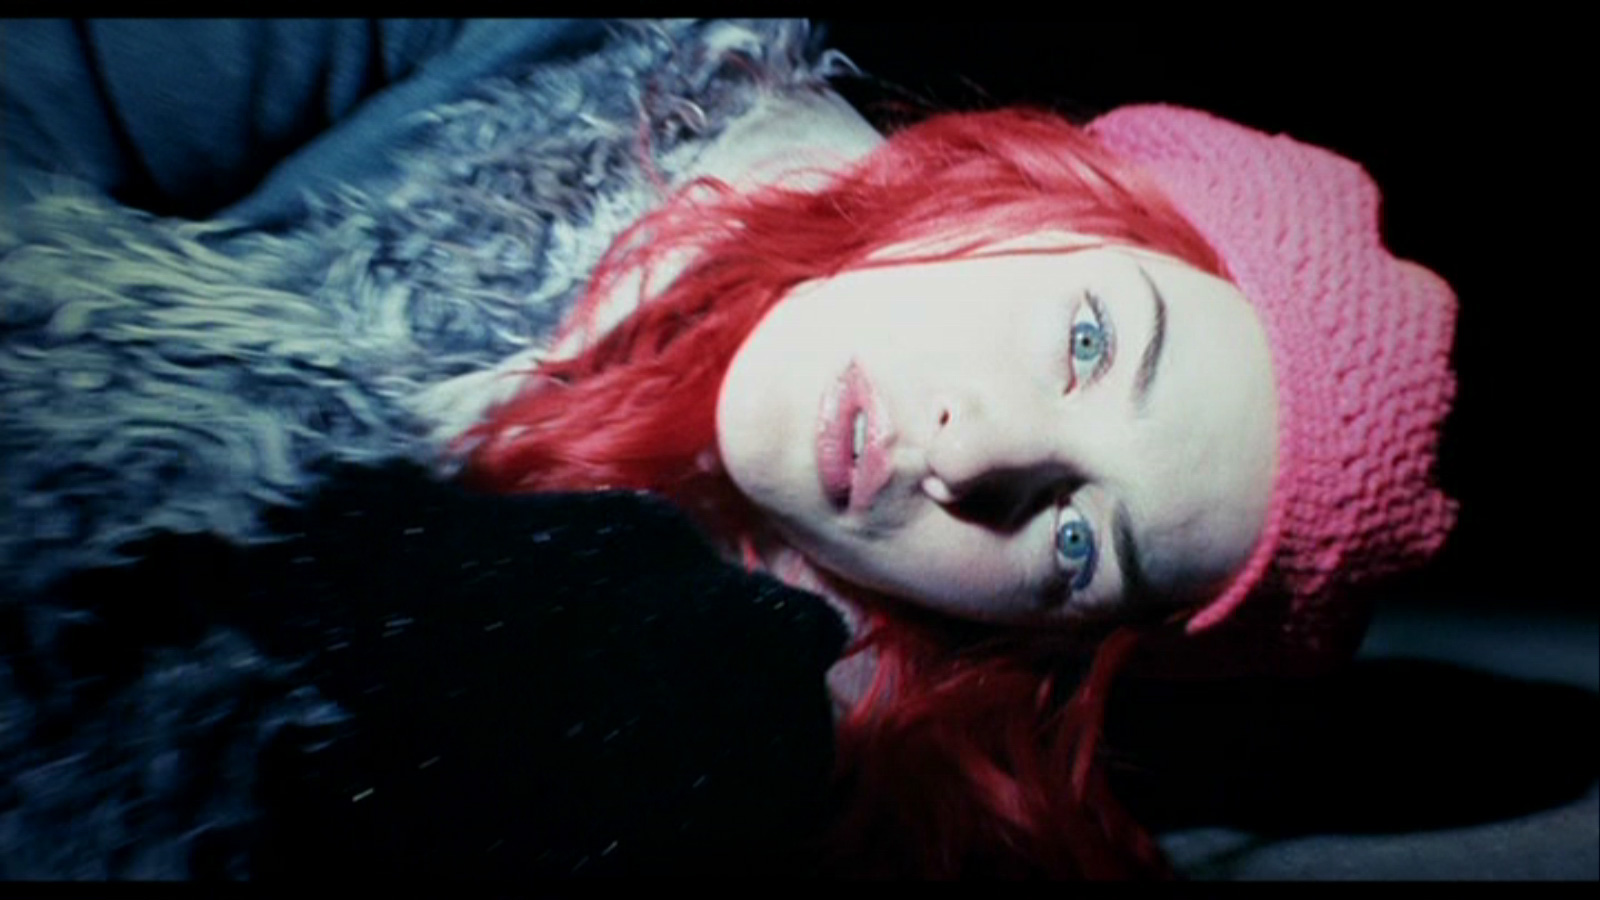 eternal sunshine of the spotless mind watch free